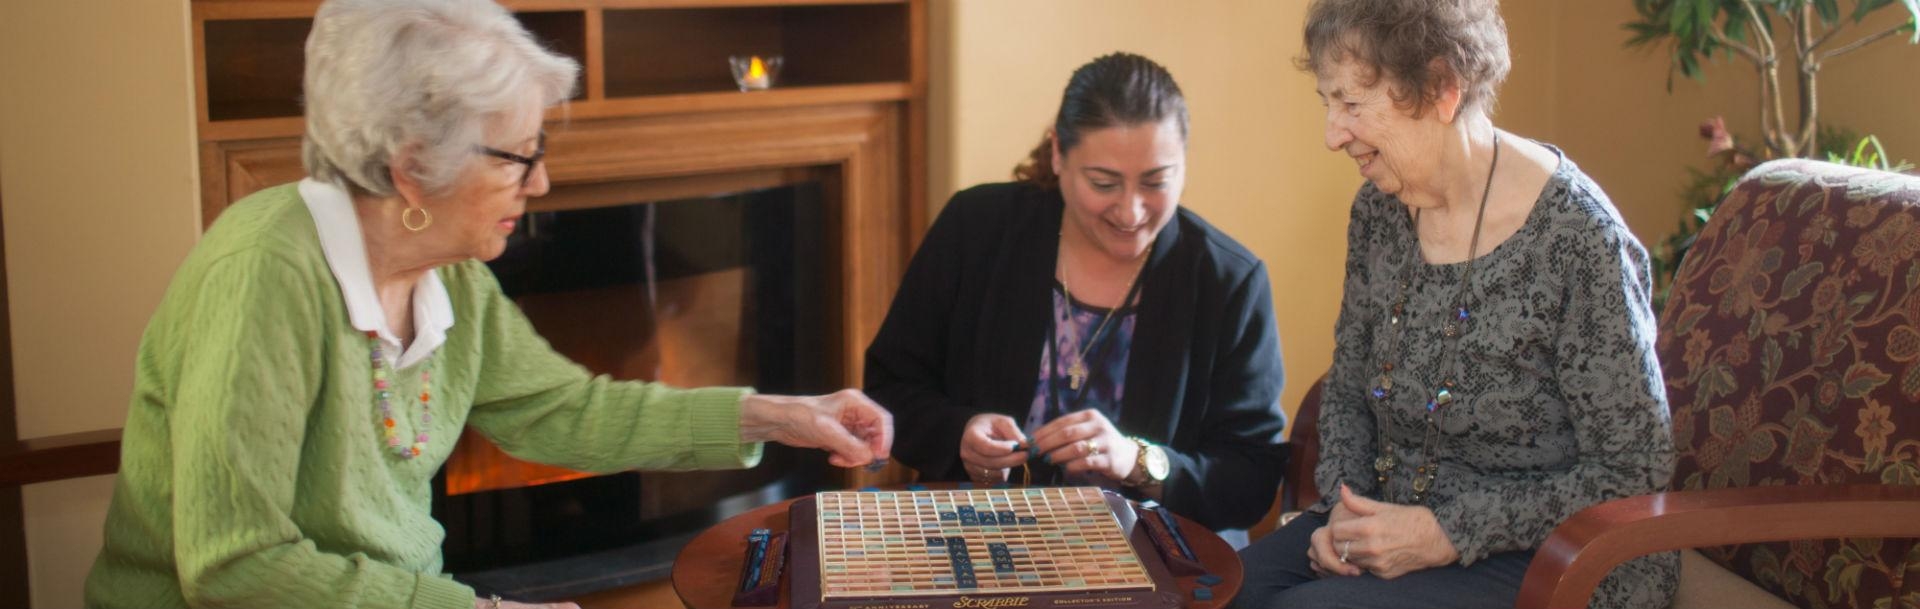 Our long term residents playing scrabble with staff